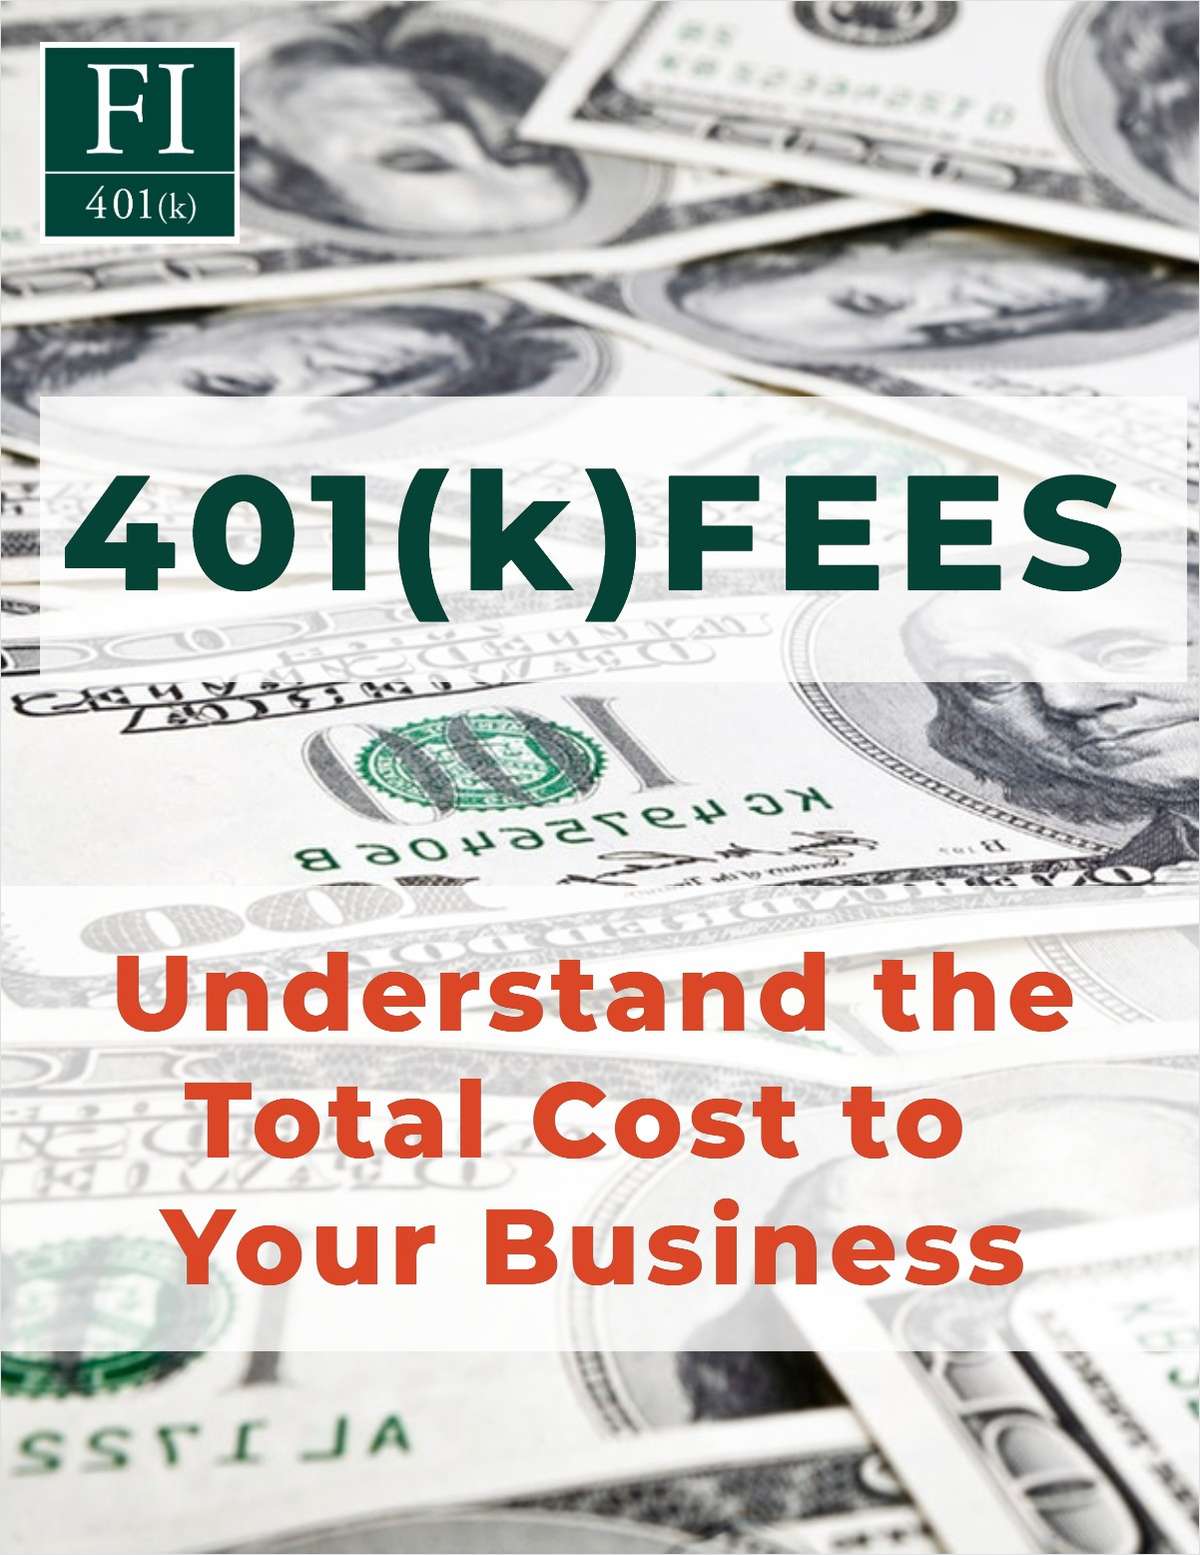 Understand Your Small Business 401(k) Fees